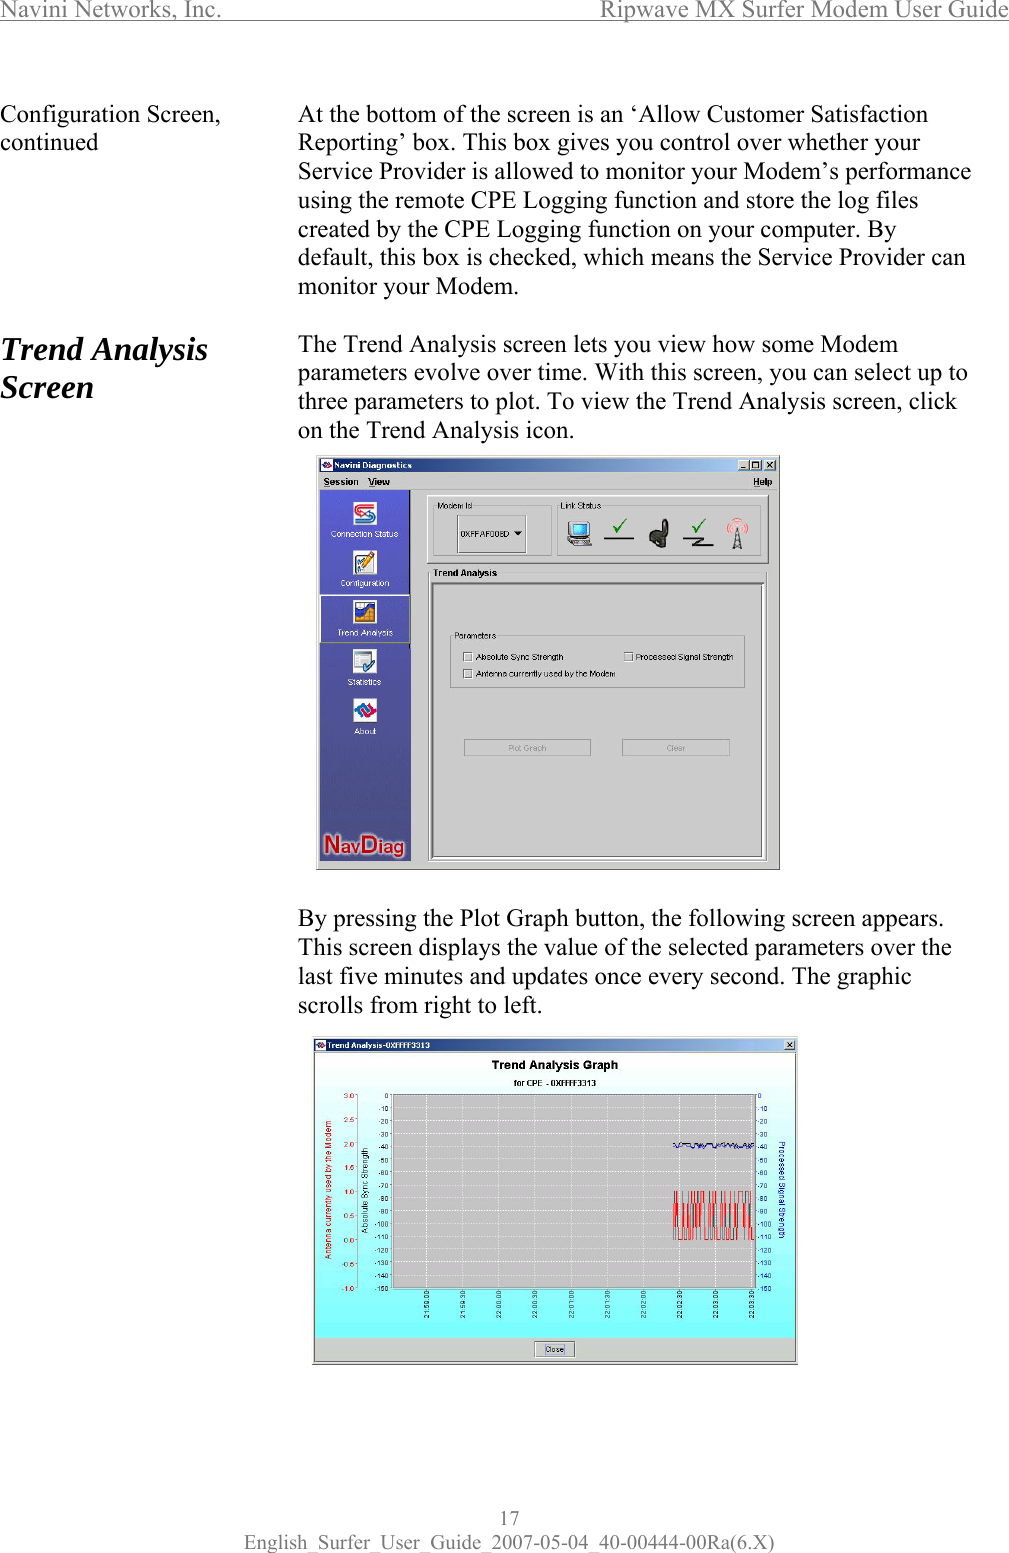 Navini Networks, Inc.      Ripwave MX Surfer Modem User Guide 17 English_Surfer_User_Guide_2007-05-04_40-00444-00Ra(6.X) Configuration Screen, continued       Trend Analysis Screen                                   At the bottom of the screen is an ‘Allow Customer Satisfaction Reporting’ box. This box gives you control over whether your Service Provider is allowed to monitor your Modem’s performance using the remote CPE Logging function and store the log files created by the CPE Logging function on your computer. By default, this box is checked, which means the Service Provider can monitor your Modem.   The Trend Analysis screen lets you view how some Modem parameters evolve over time. With this screen, you can select up to three parameters to plot. To view the Trend Analysis screen, click on the Trend Analysis icon.                 By pressing the Plot Graph button, the following screen appears. This screen displays the value of the selected parameters over the last five minutes and updates once every second. The graphic scrolls from right to left.              